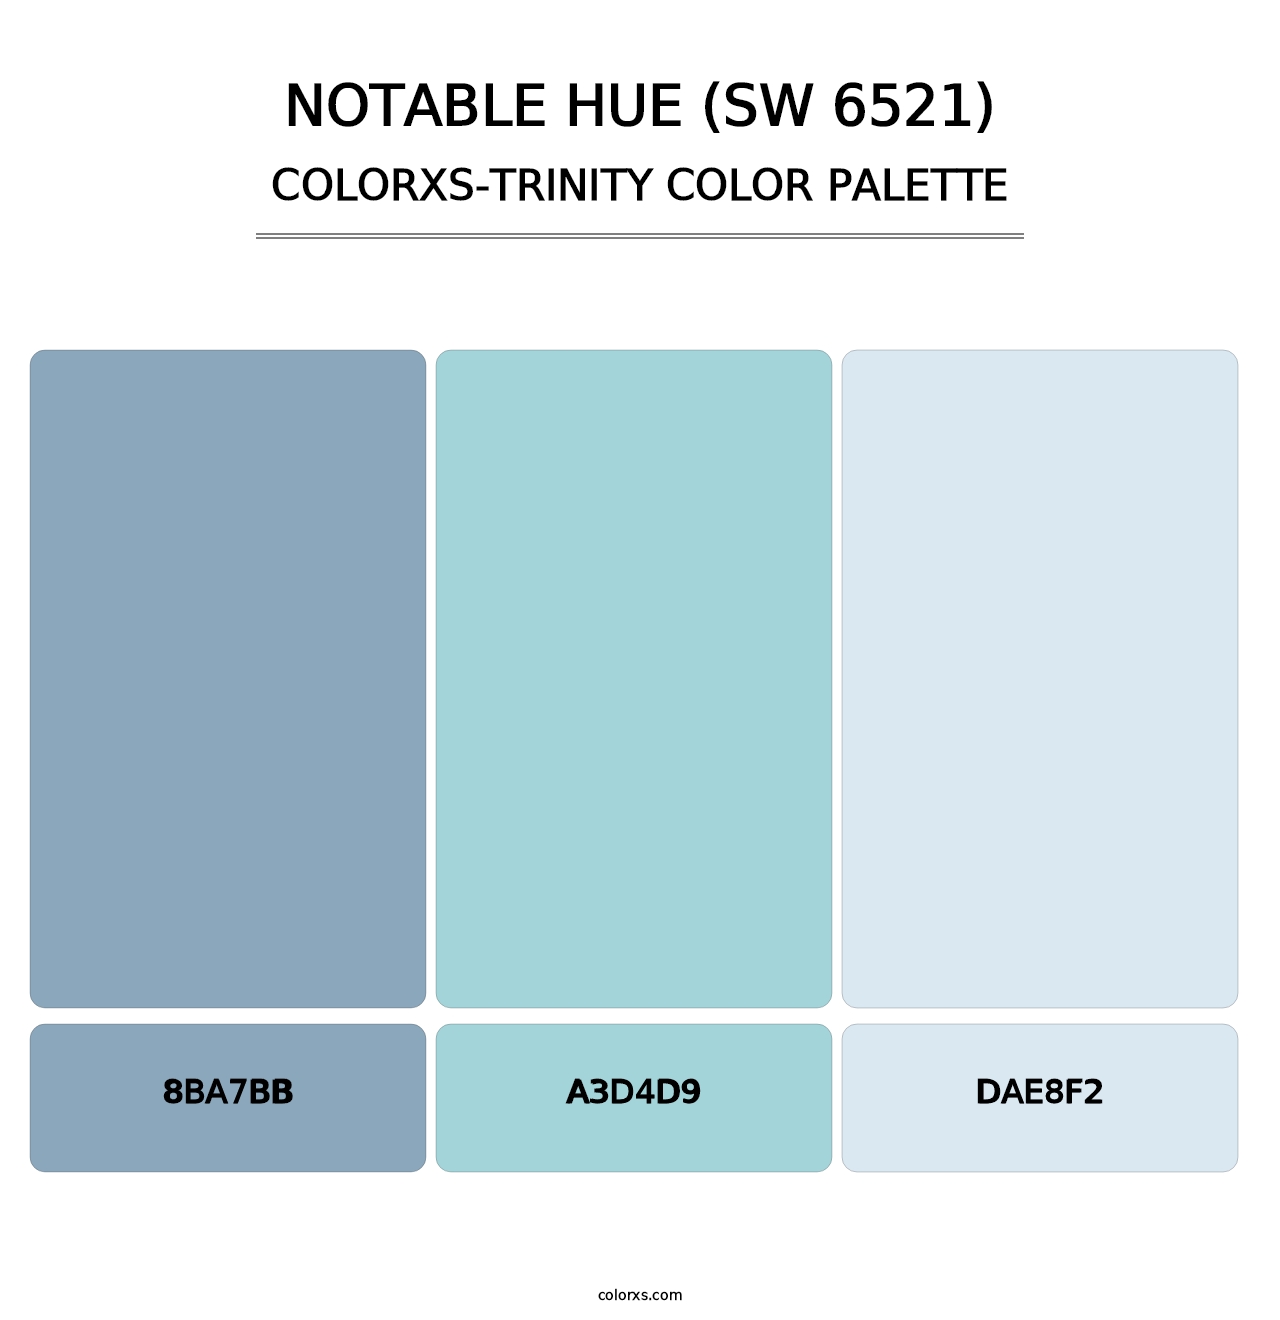 Notable Hue (SW 6521) - Colorxs Trinity Palette